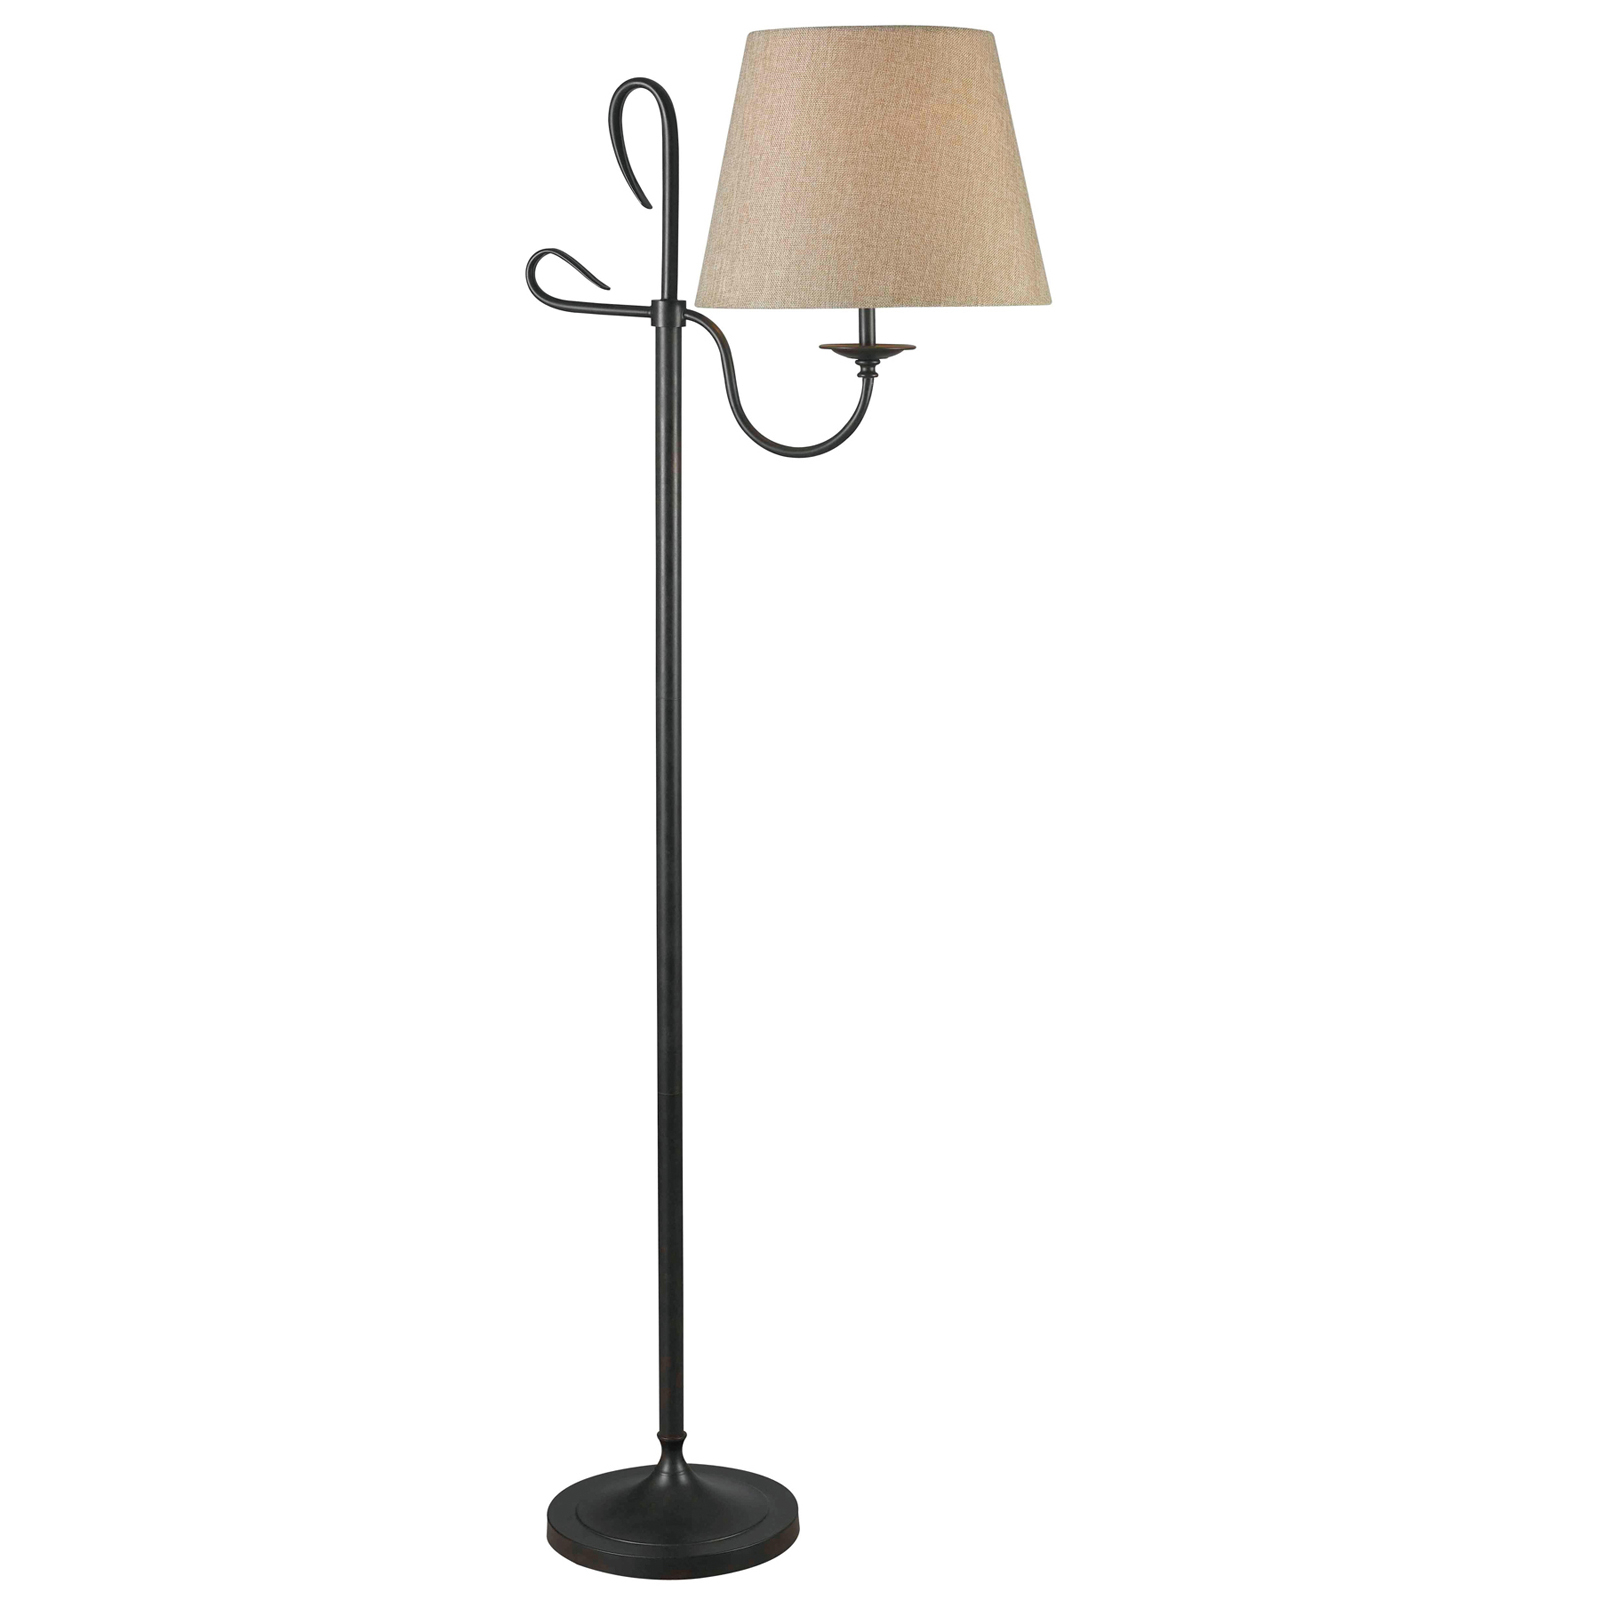 Kmart Floor Lamps R On Simple For Table Wooden Spotlight within sizing 1600 X 1600